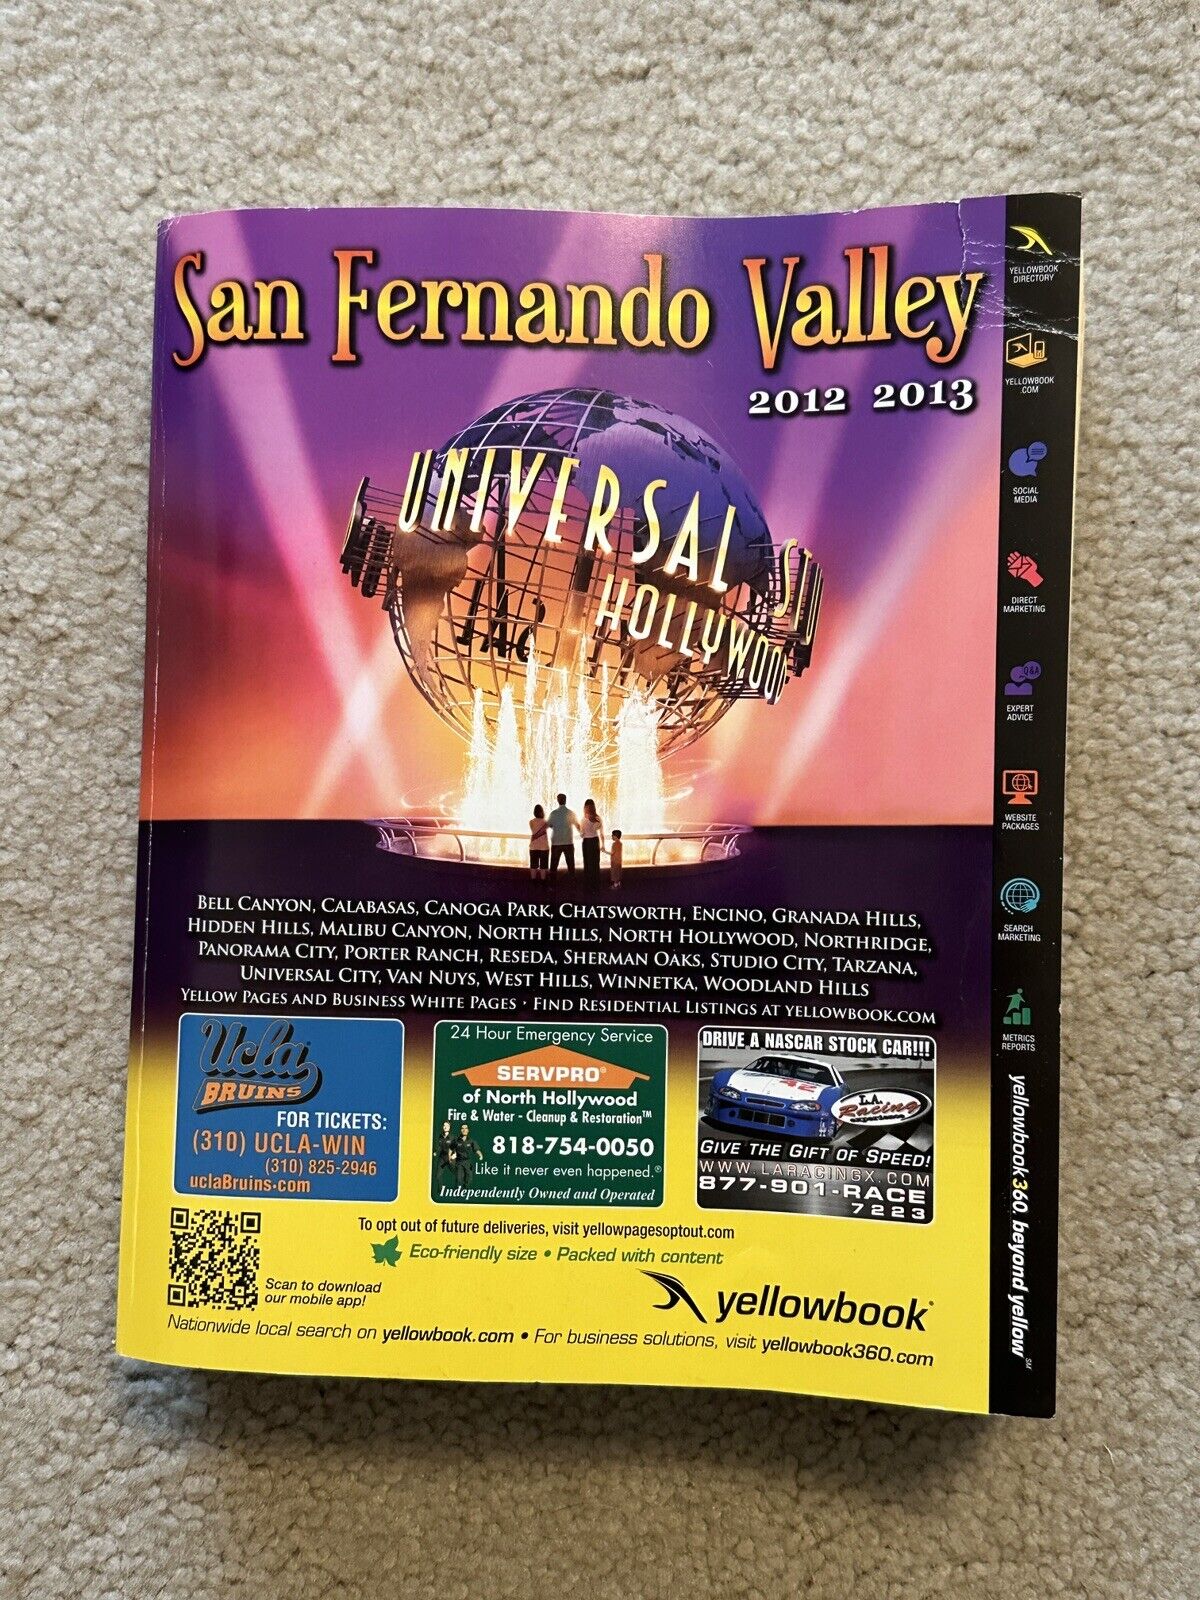 Yellow Pages 2012 2013 San Fernando Valley Los Angeles California